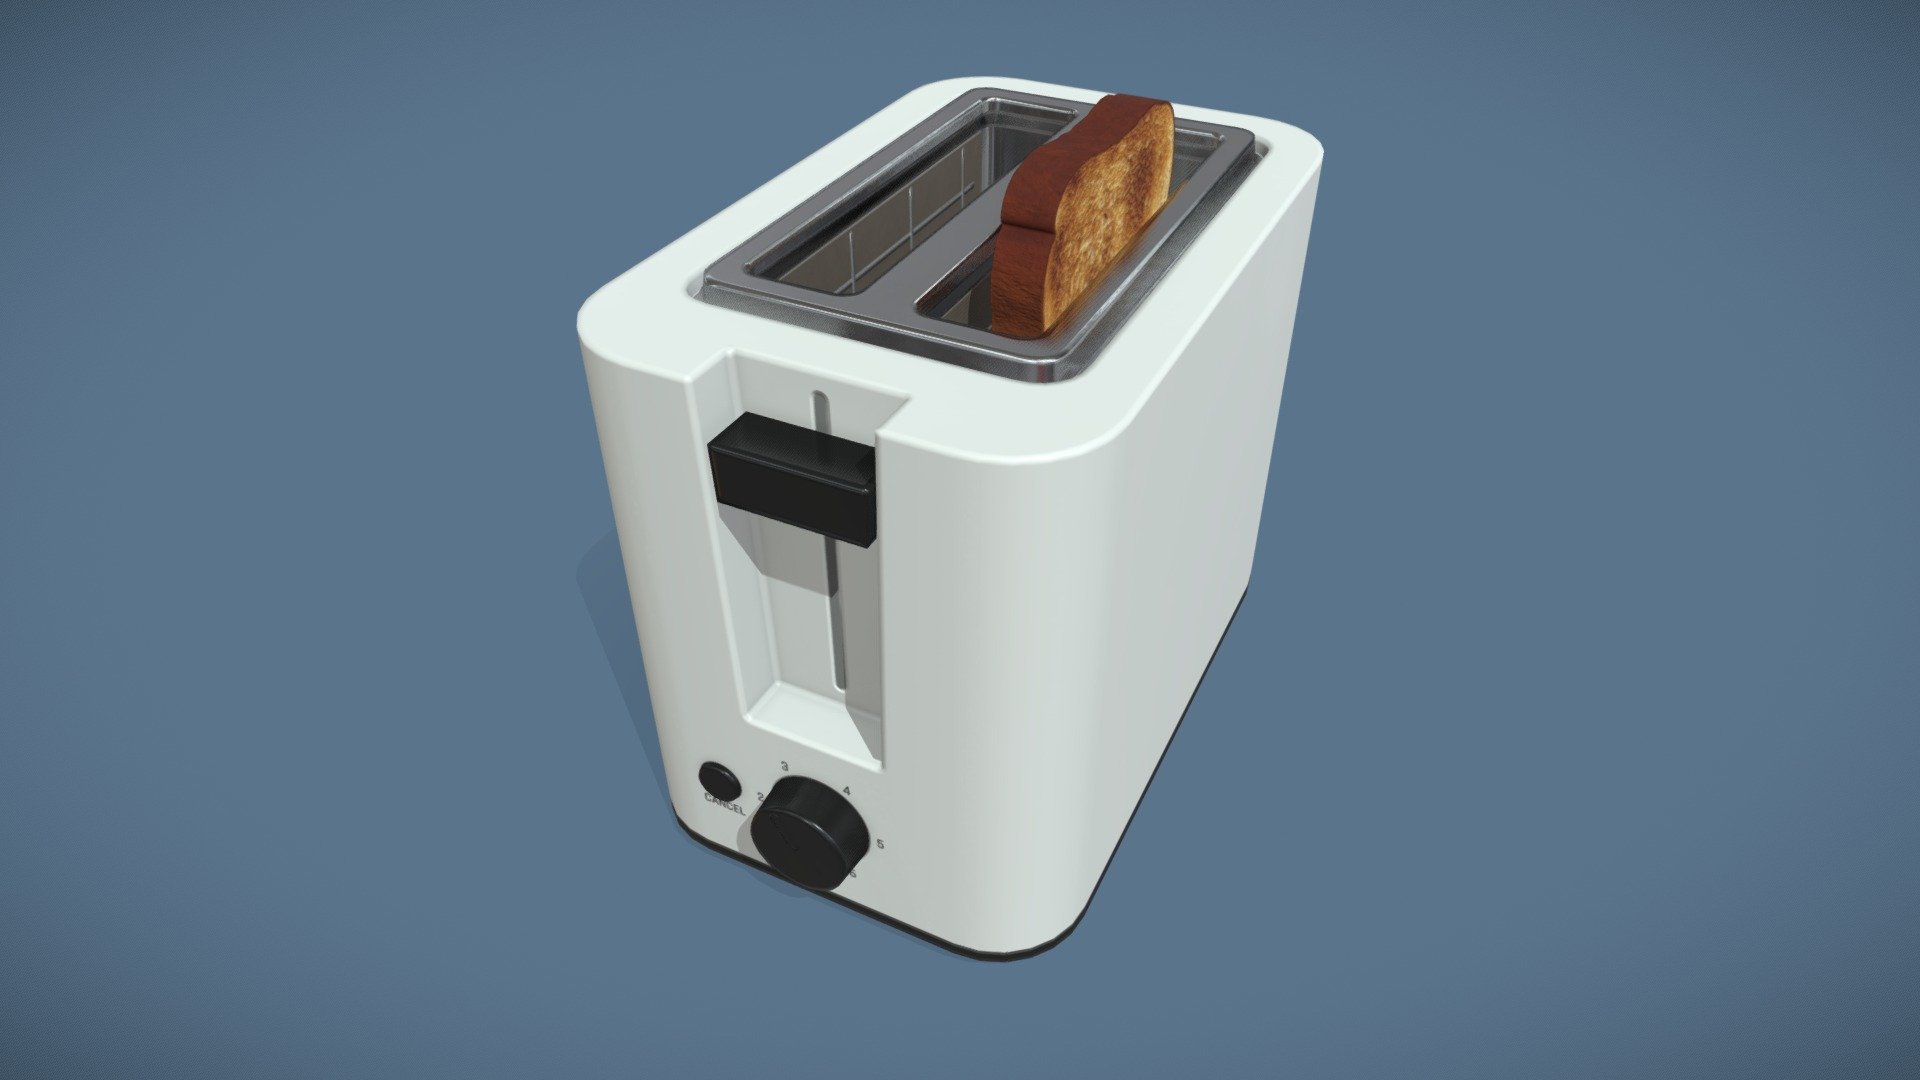 Toaster - French toast maker 3D model